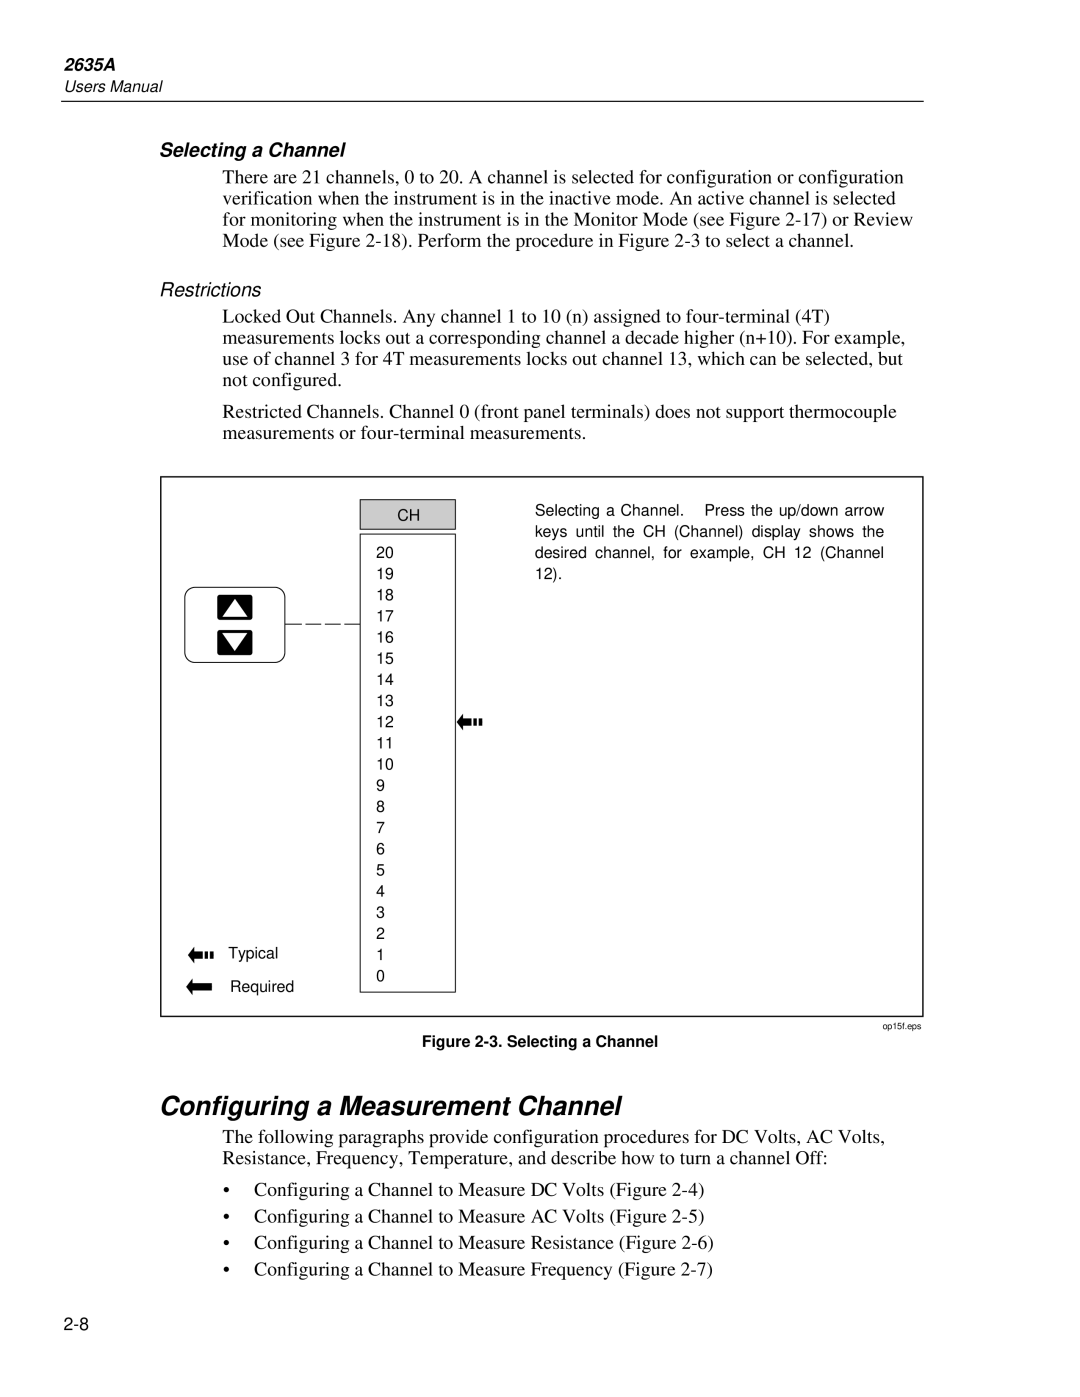 Fluke 2635A user manual Configuring a Measurement Channel, Selecting a Channel, Restrictions 